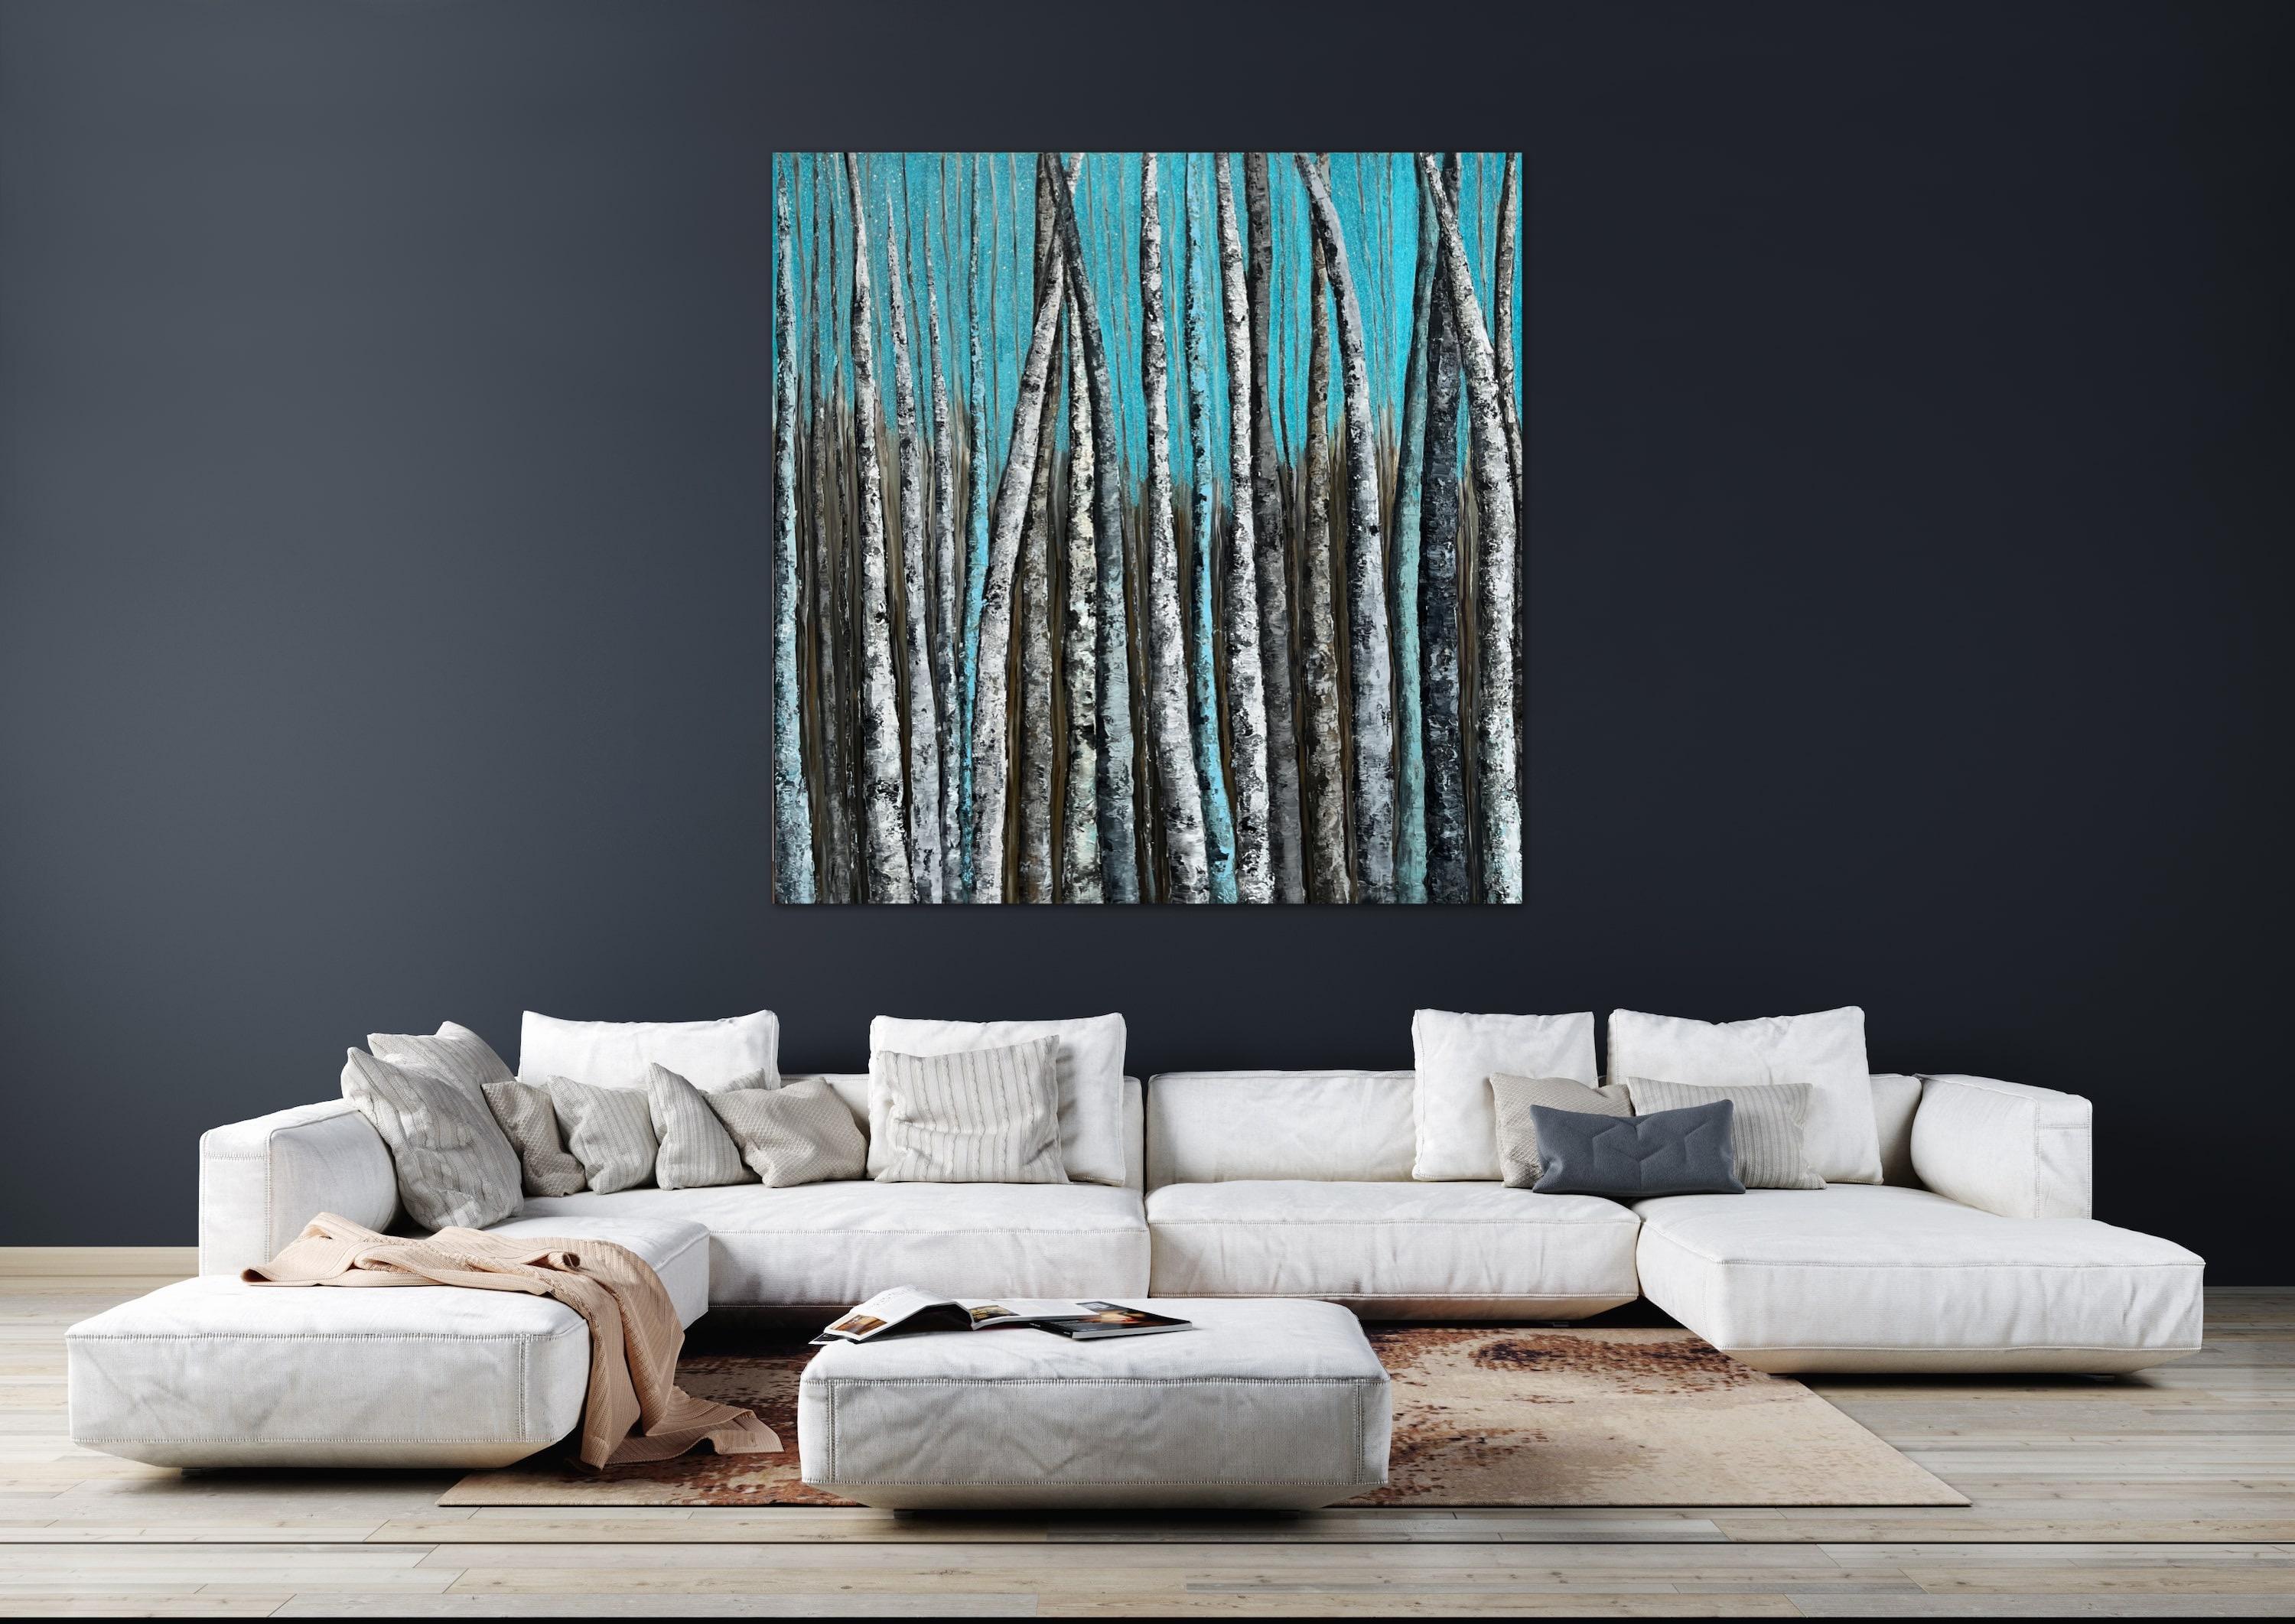 ABOUT THE ARTWORK

These remarkable arboreal beings, though seemingly barren, possess an undeniable aura of vitality, whispering tales of seasons past and the promise of rebirth. As you stand before this painting, you can almost hear the hushed